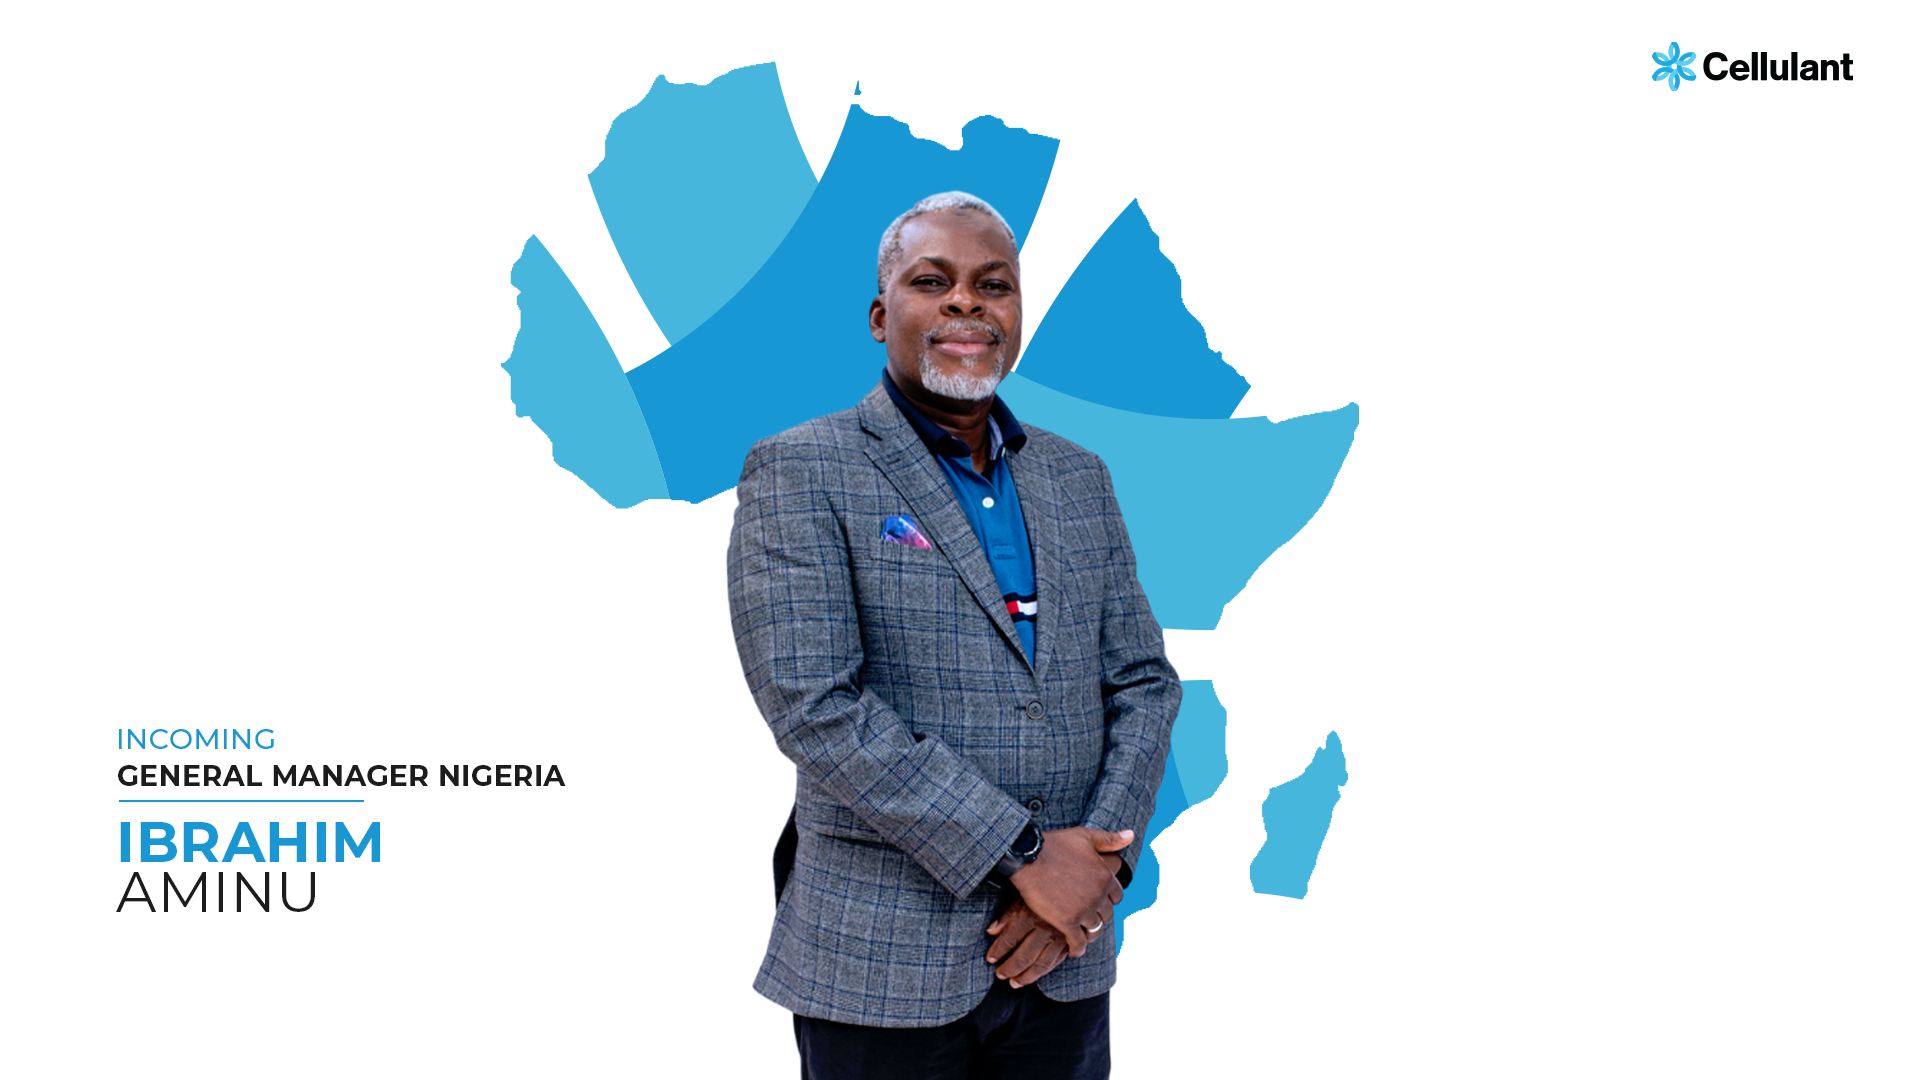 Cellulant Welcomes Ibrahim As General Manager In Nigeria